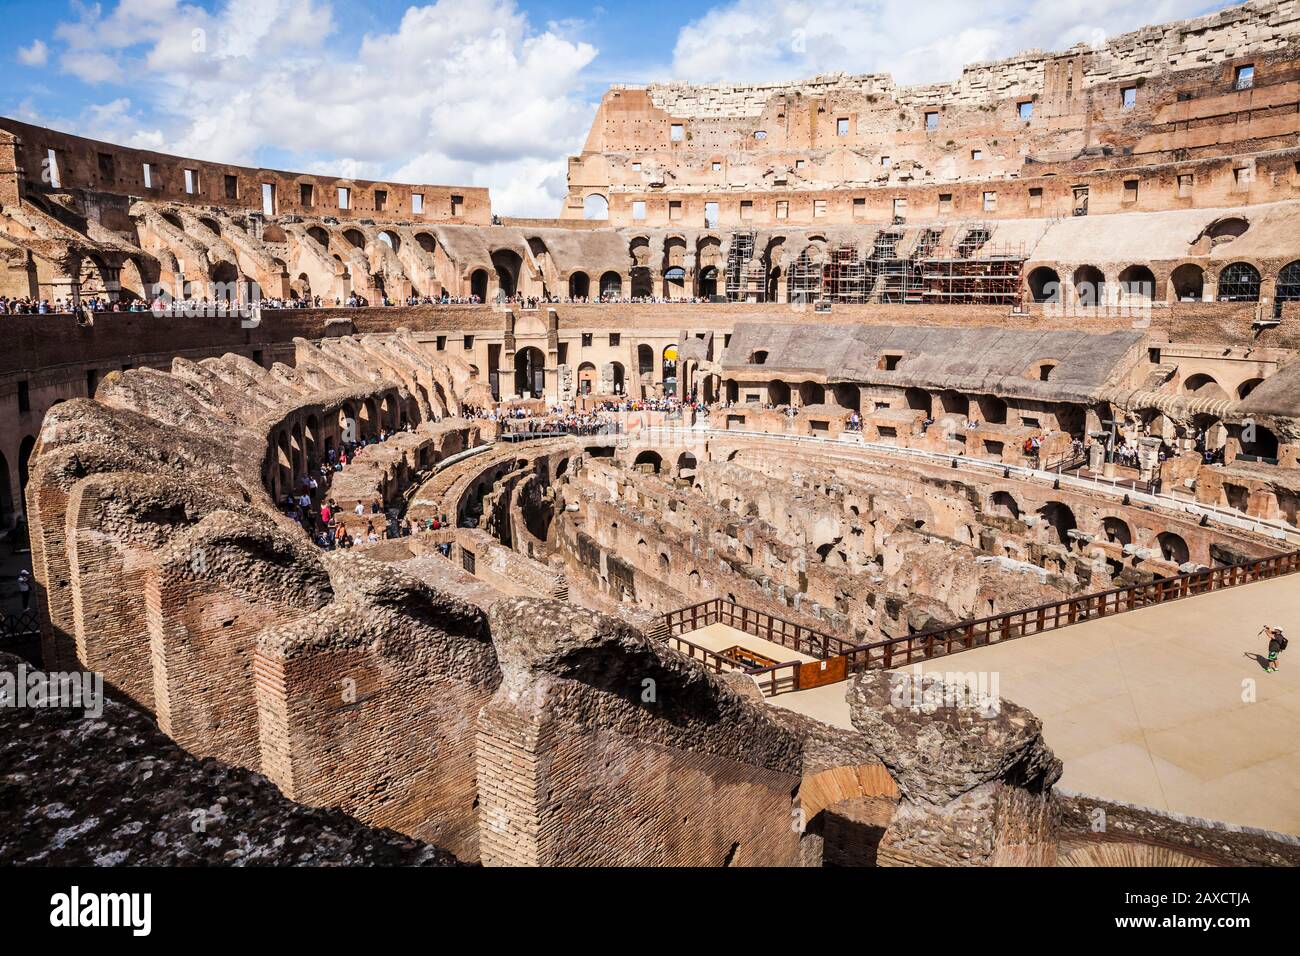 A wide angle view of the interior of the Colosseum in Rome, Italy with tourists wandering about. Stock Photo